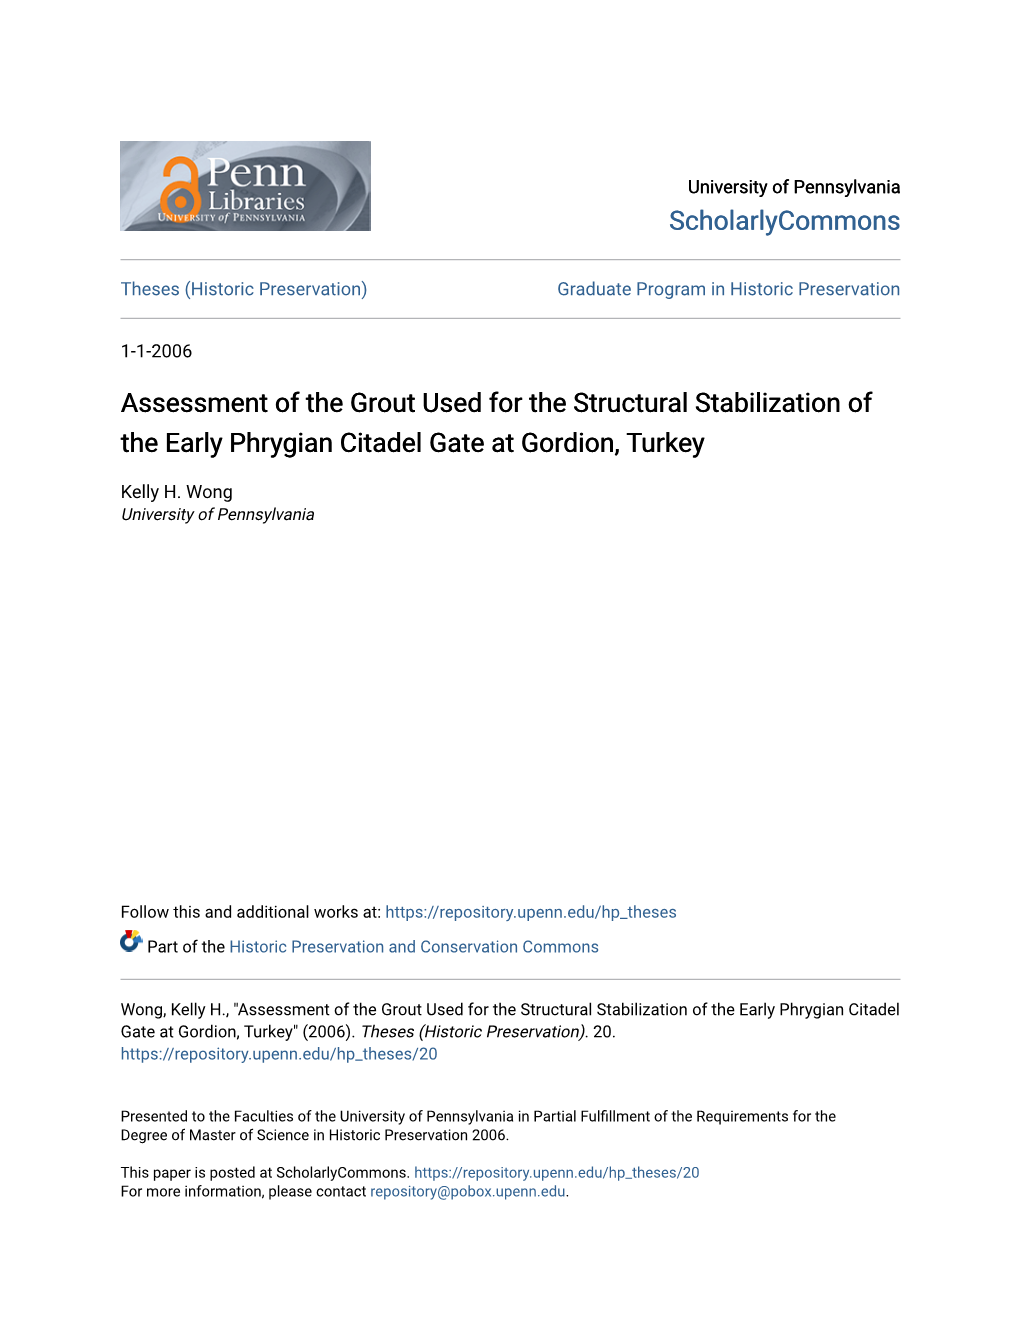 Assessment of the Grout Used for the Structural Stabilization of the Early Phrygian Citadel Gate at Gordion, Turkey